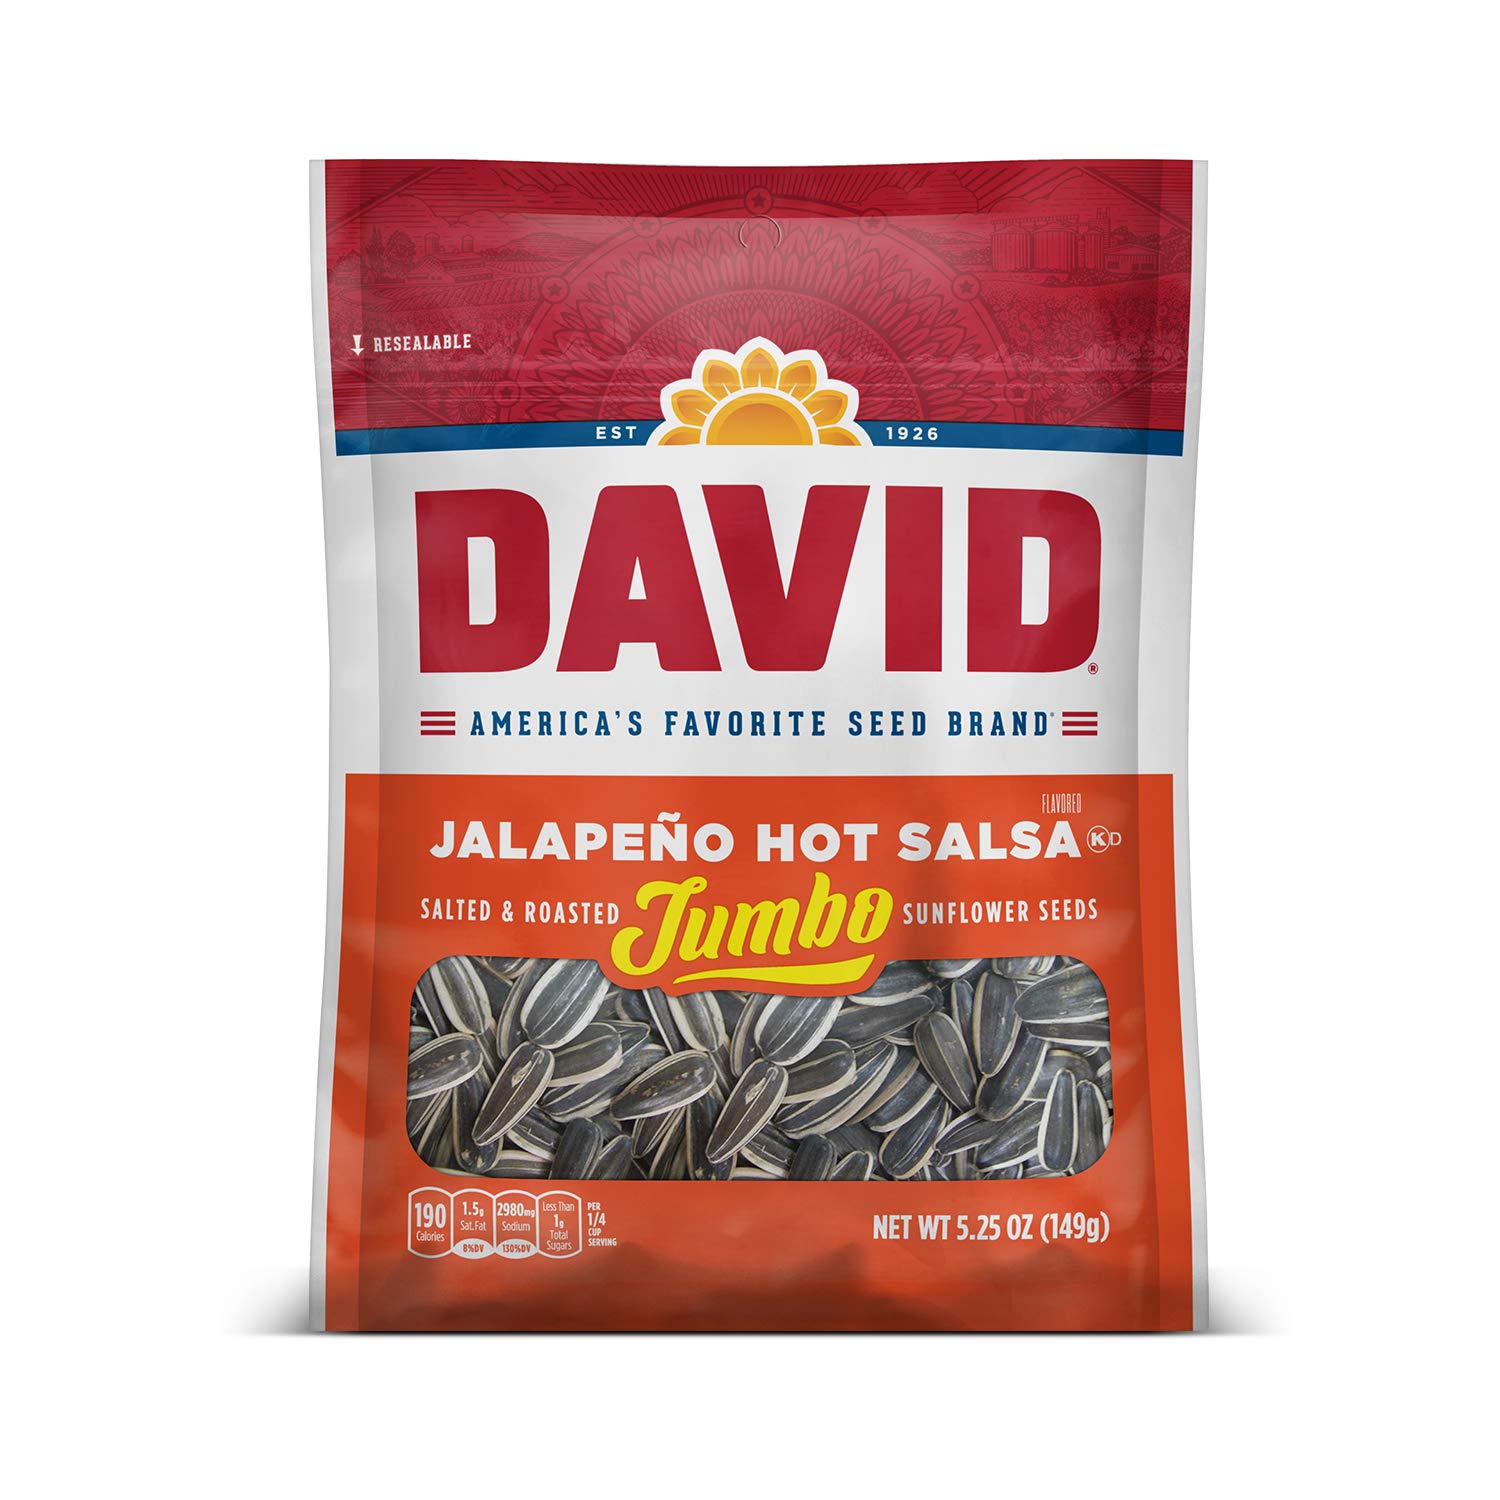 Amazon: 12 Pack David Seeds Jumbo Sunflower Seeds Ranch Flavor, 12 5.25-Ounce Bags $8.05 w/15% SS + MORE Flavors on Sale All-time Low Prices